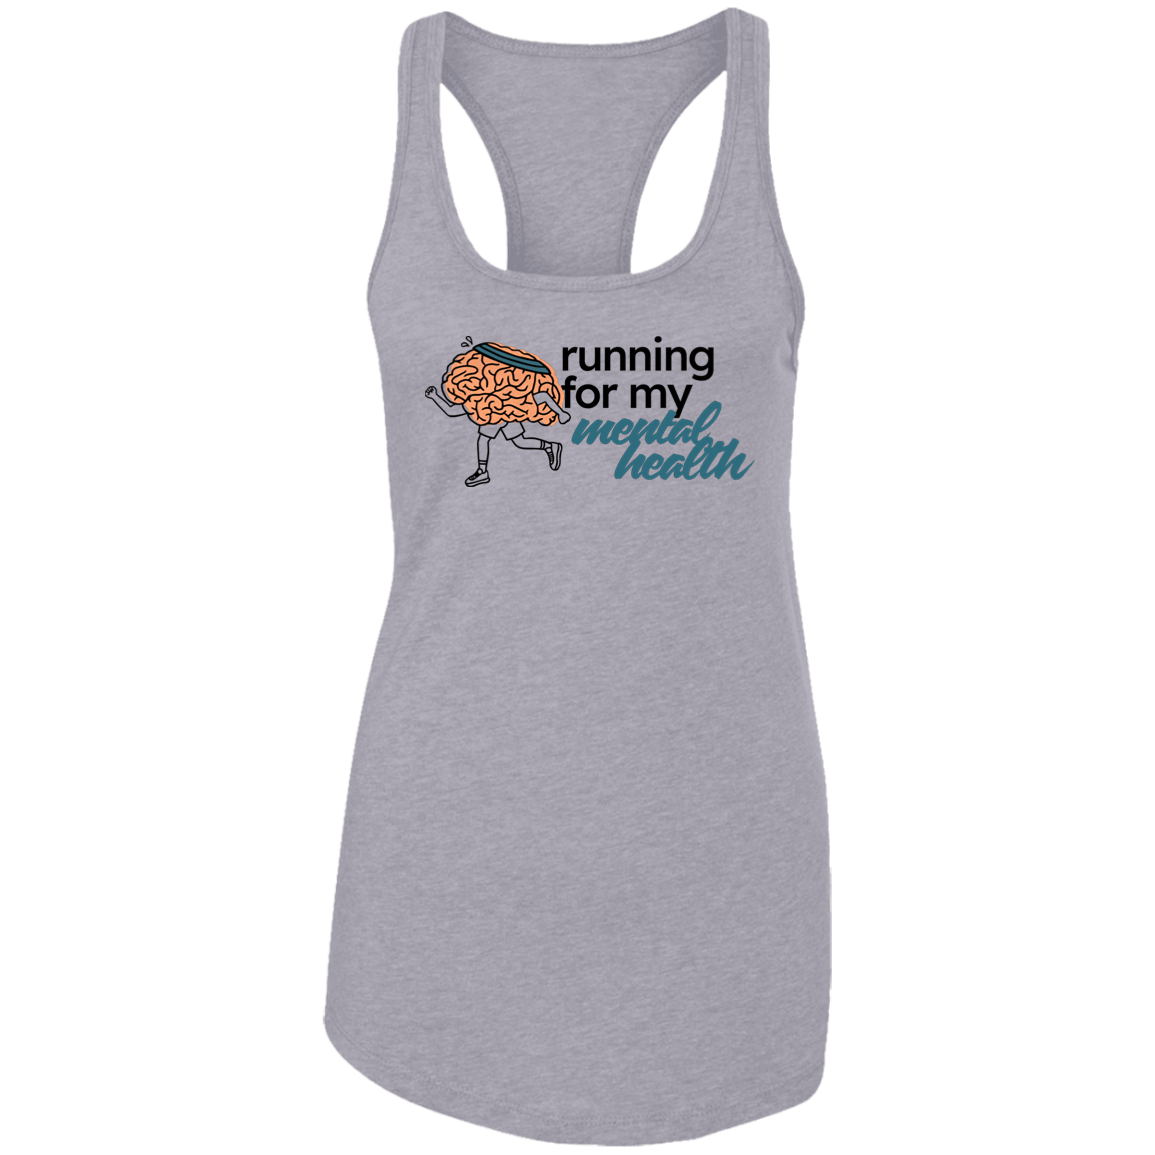 Running for My Mental Health - Fitted Racerback Tank